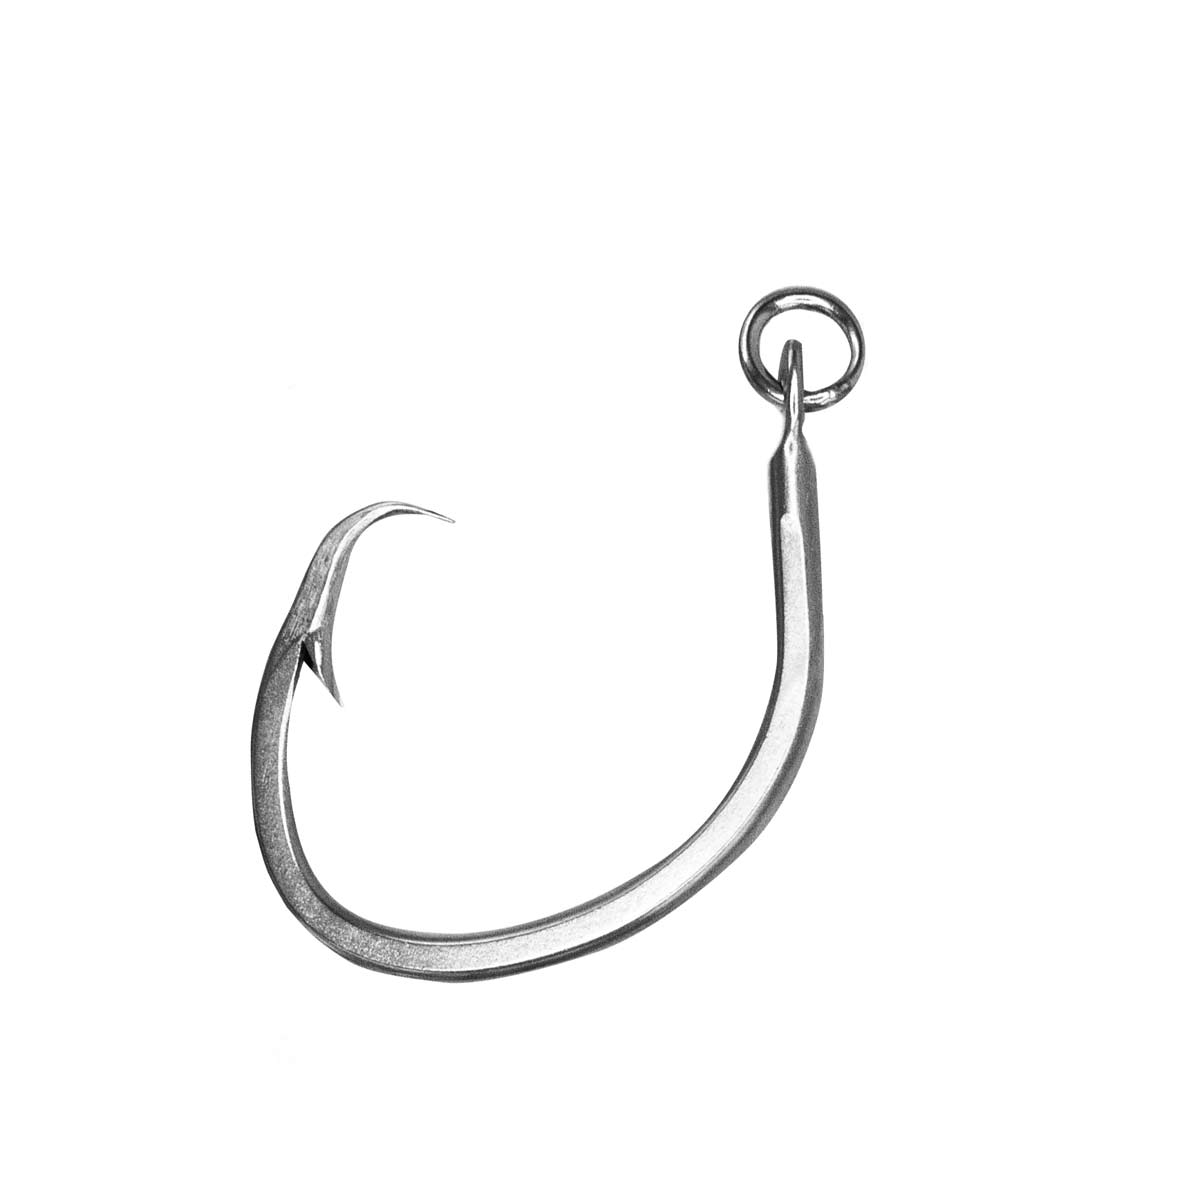  Rite Angler Inline Circle Hook (25 Pack) Saltwater Freshwater  Offshore Inshore Fishing Live Bait 3/0, 4/0, 5/0, 6/0, 7/0, 8/0 Hook Sizes  (#1) : Sports & Outdoors